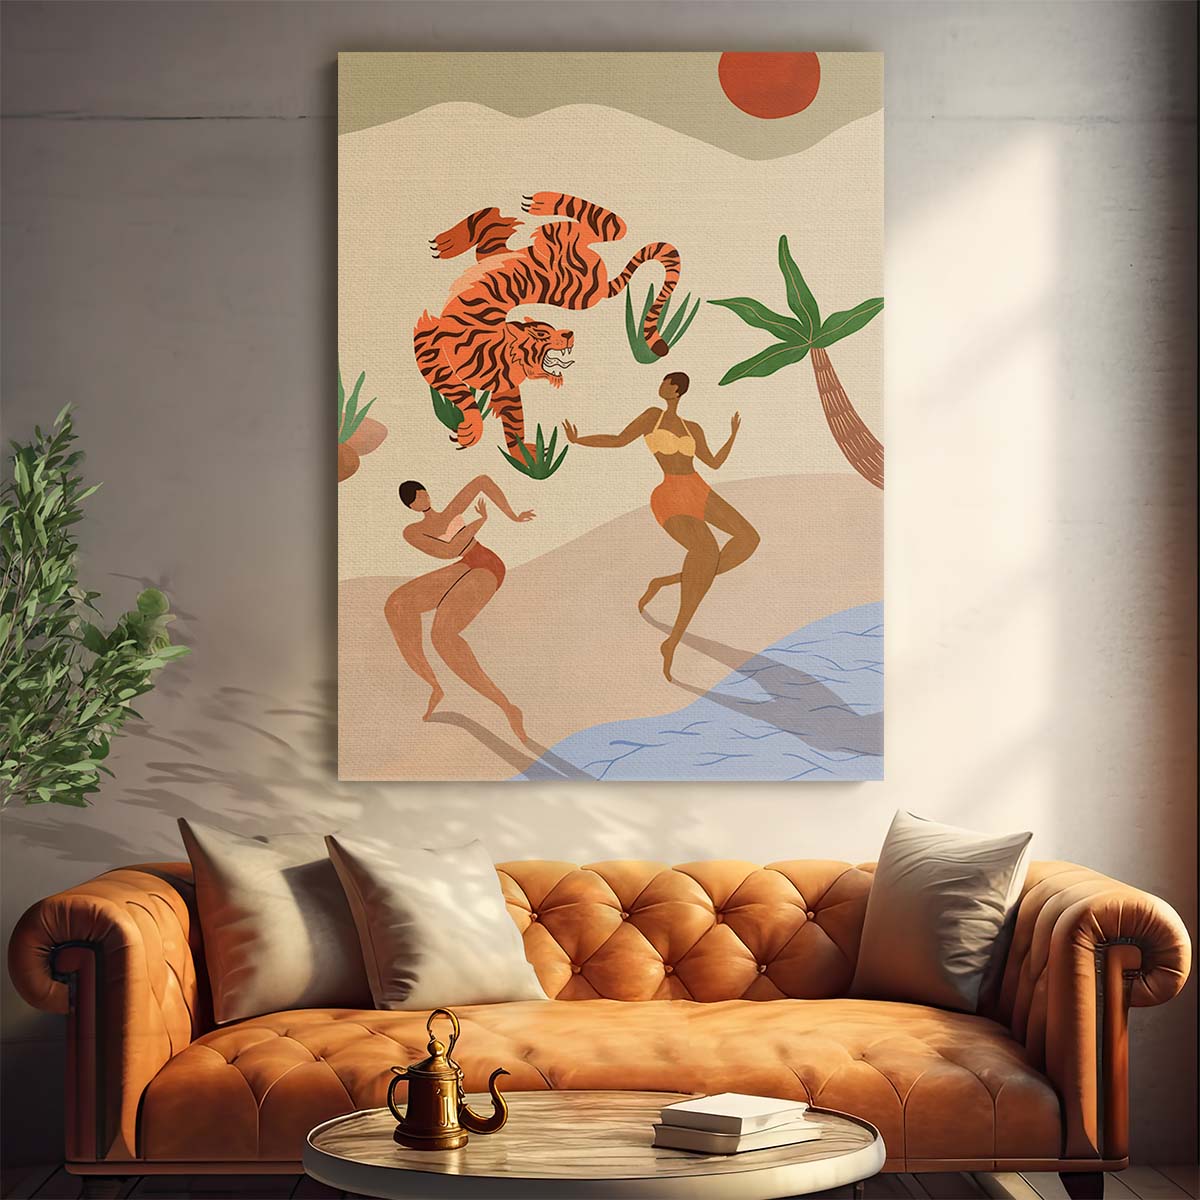 Exotic Beach Dance with Tigers Figurative Illustration Art by Luxuriance Designs, made in USA